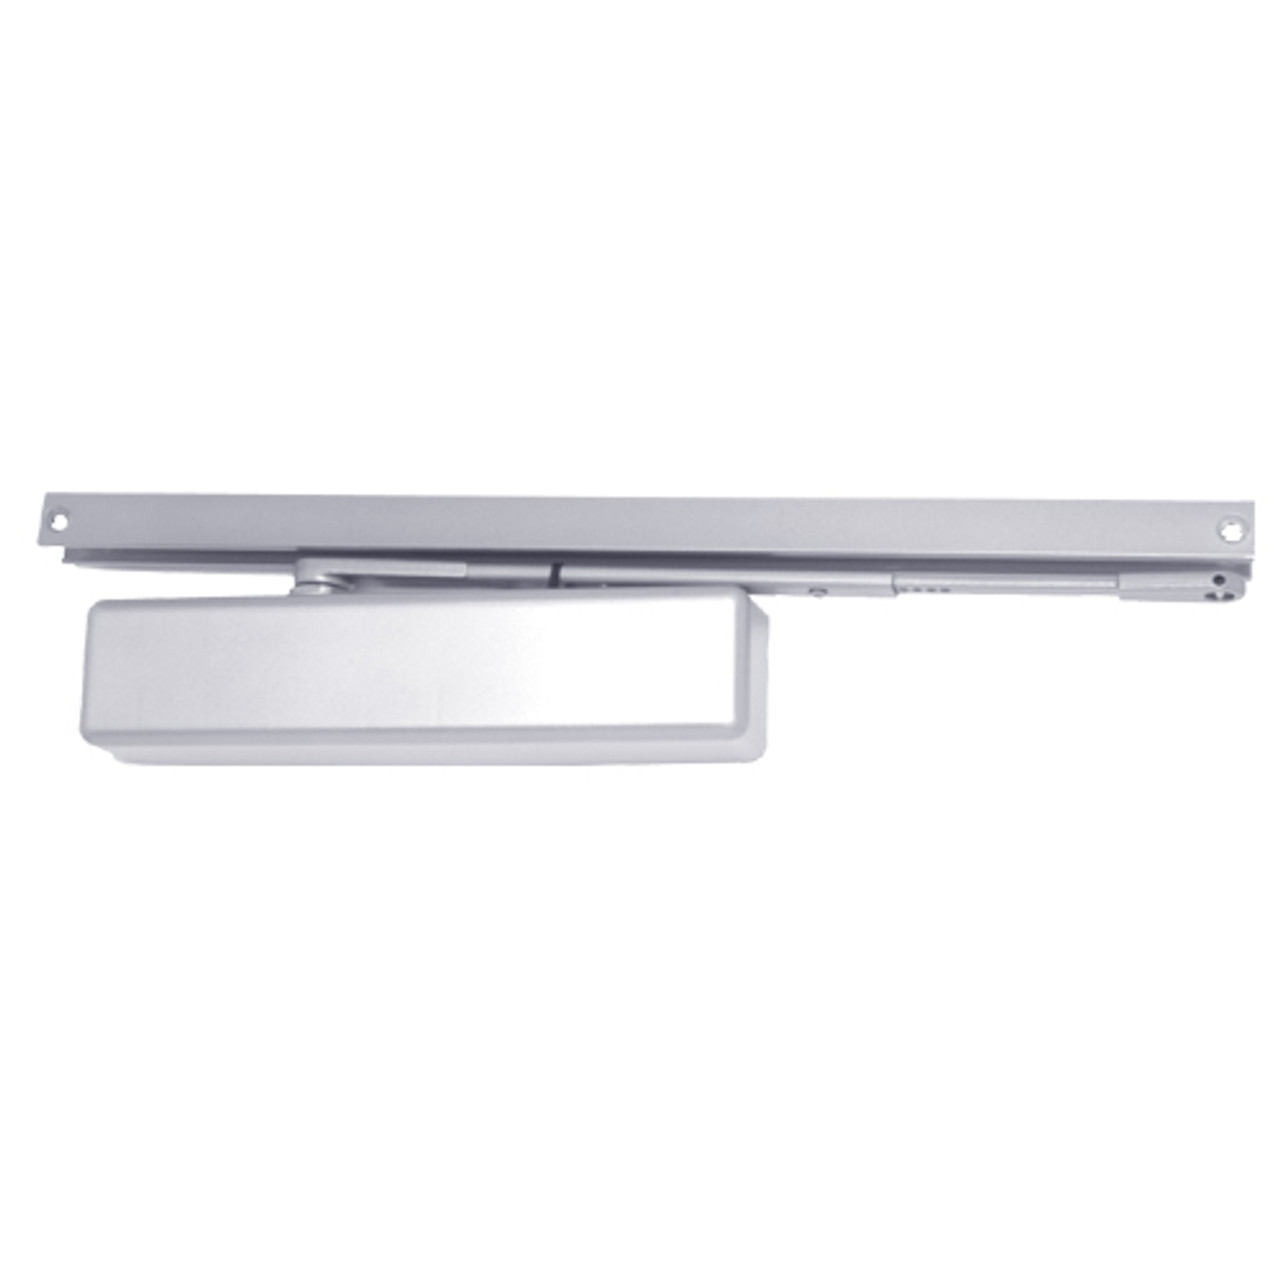 1461T-STD-US26 LCN Surface Mount Door Closer with Standard Arm in Bright Chrome Finish